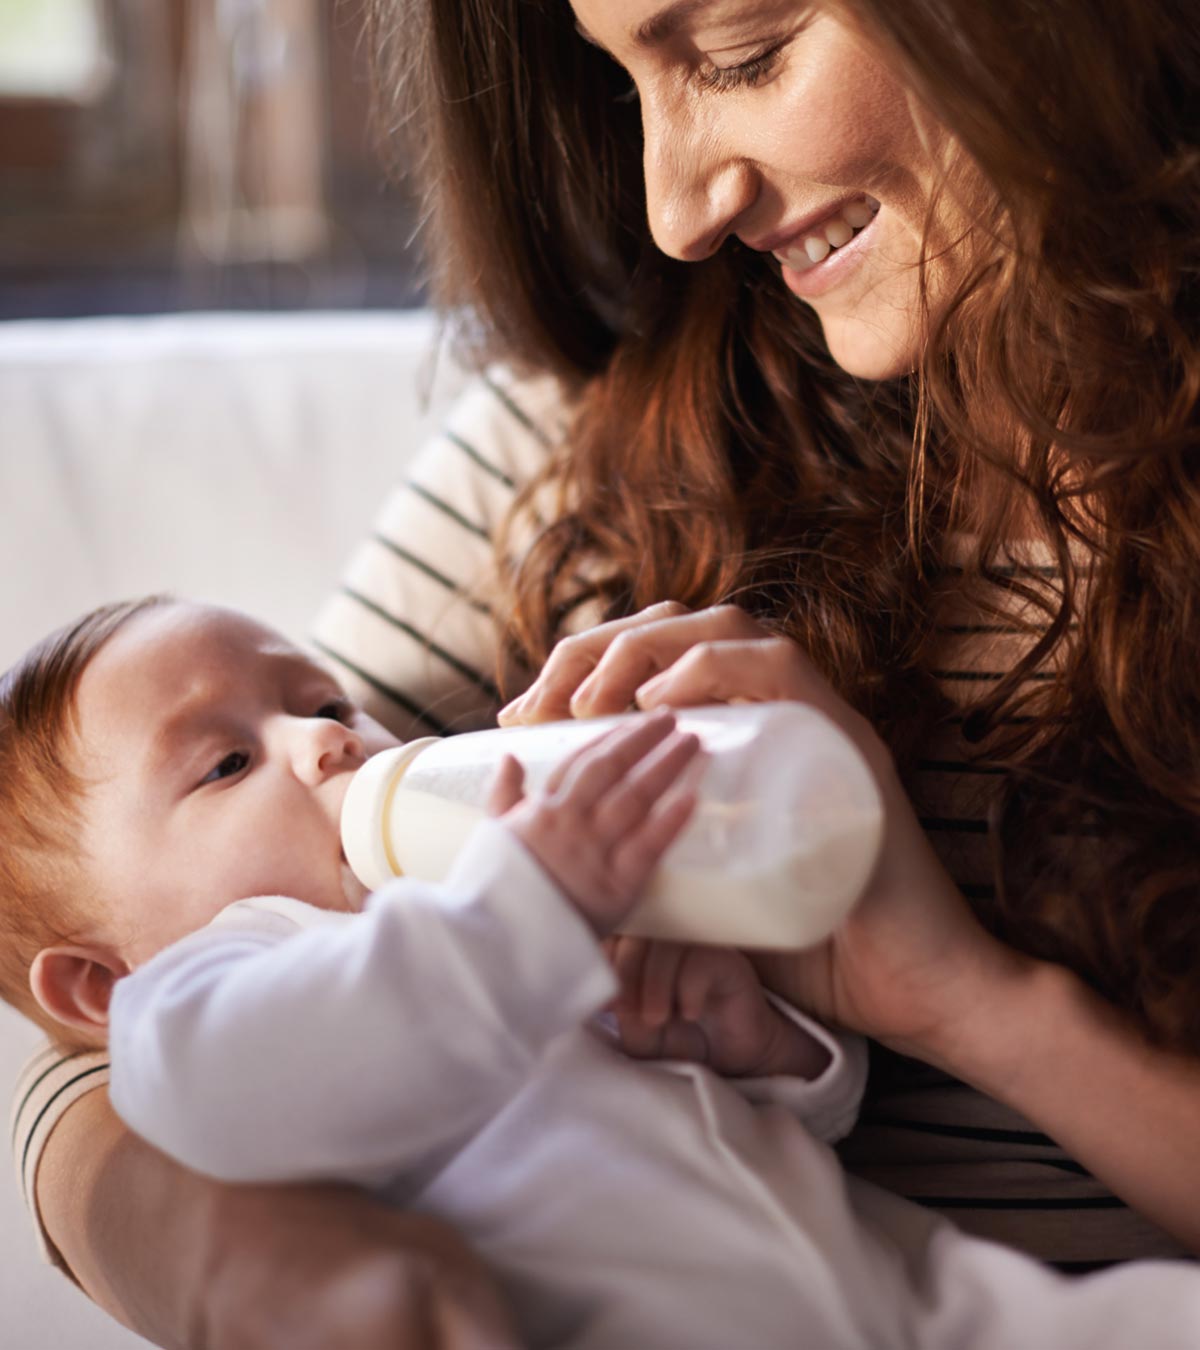 Cow Milk For Babies: Right Age, Benefits And Side Effects